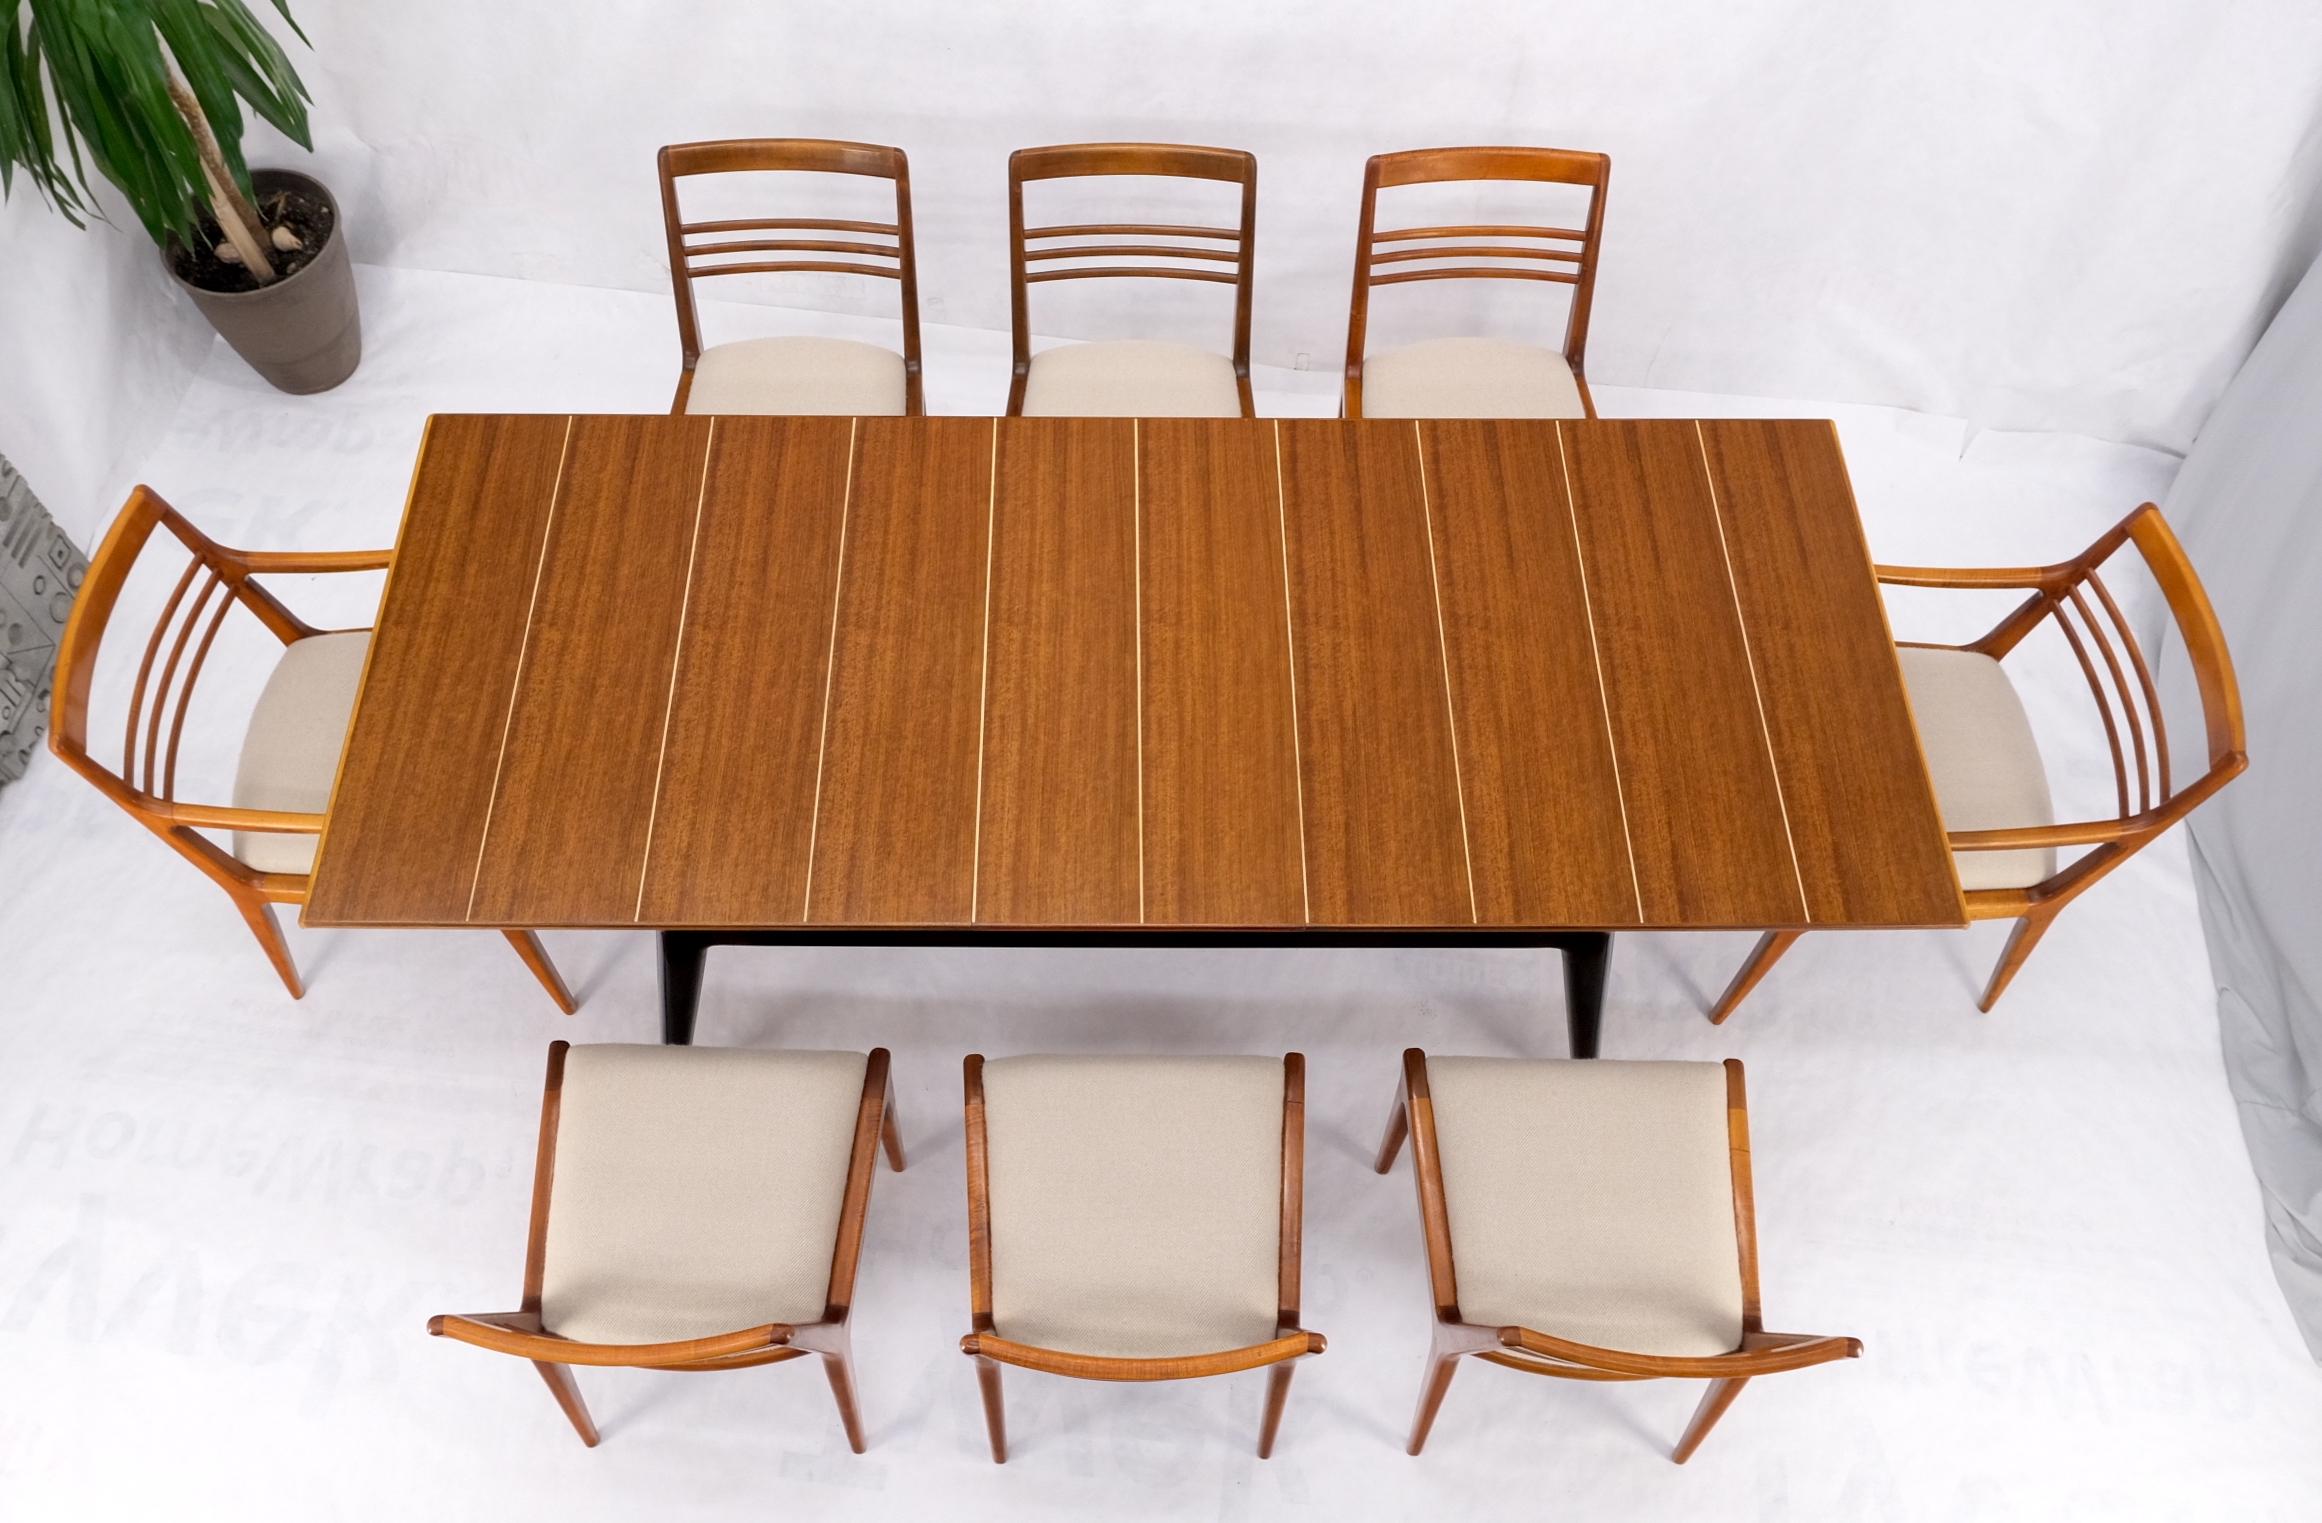 Italian Mid-Century Modern Dining Table 8 Chairs Set New Linen Upholstery Seats For Sale 11